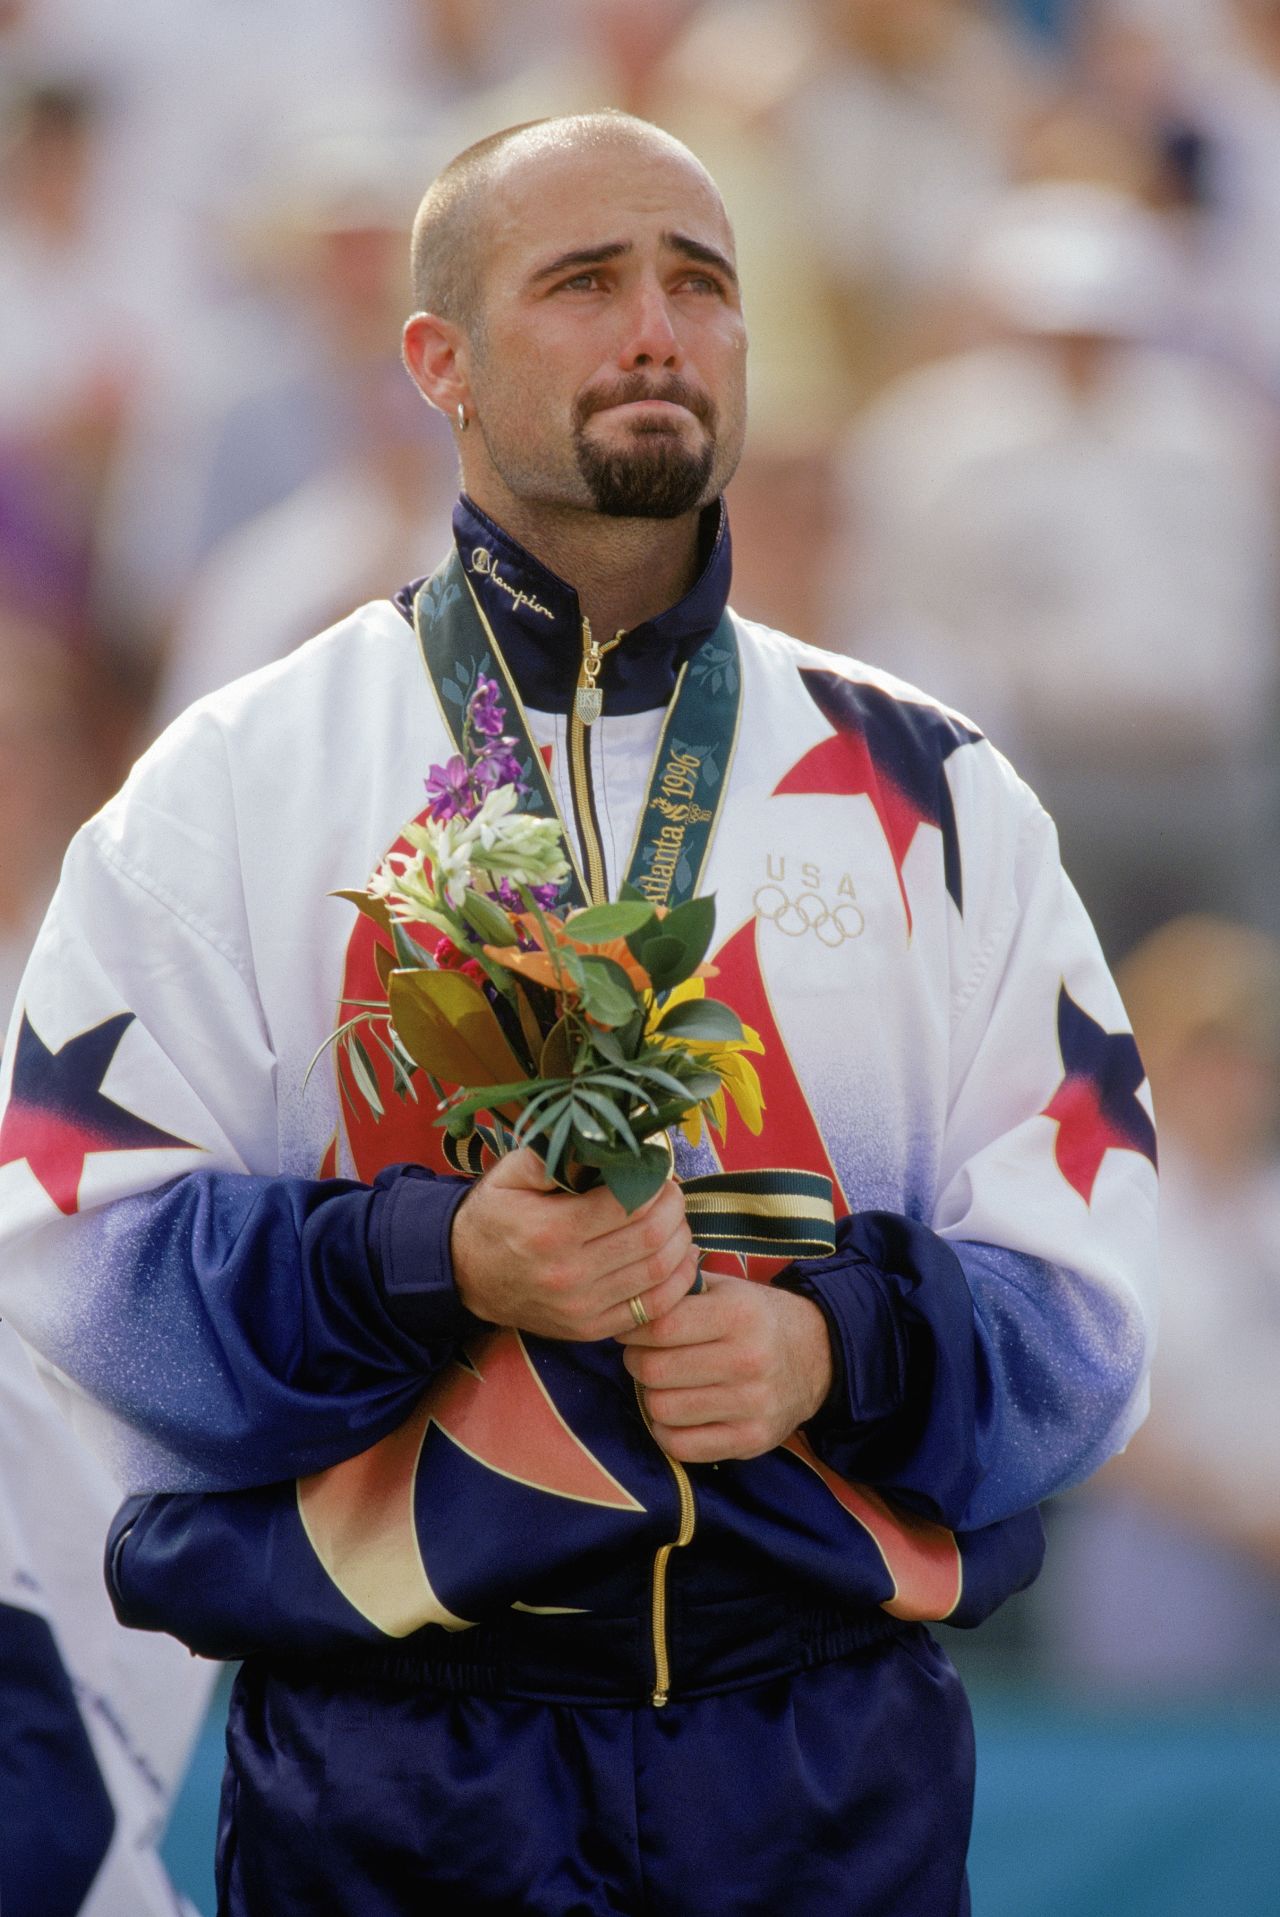 Agassi won Olympic gold in 1996 at Atlanta, and showed just how much it meant to him at the victory ceremony.